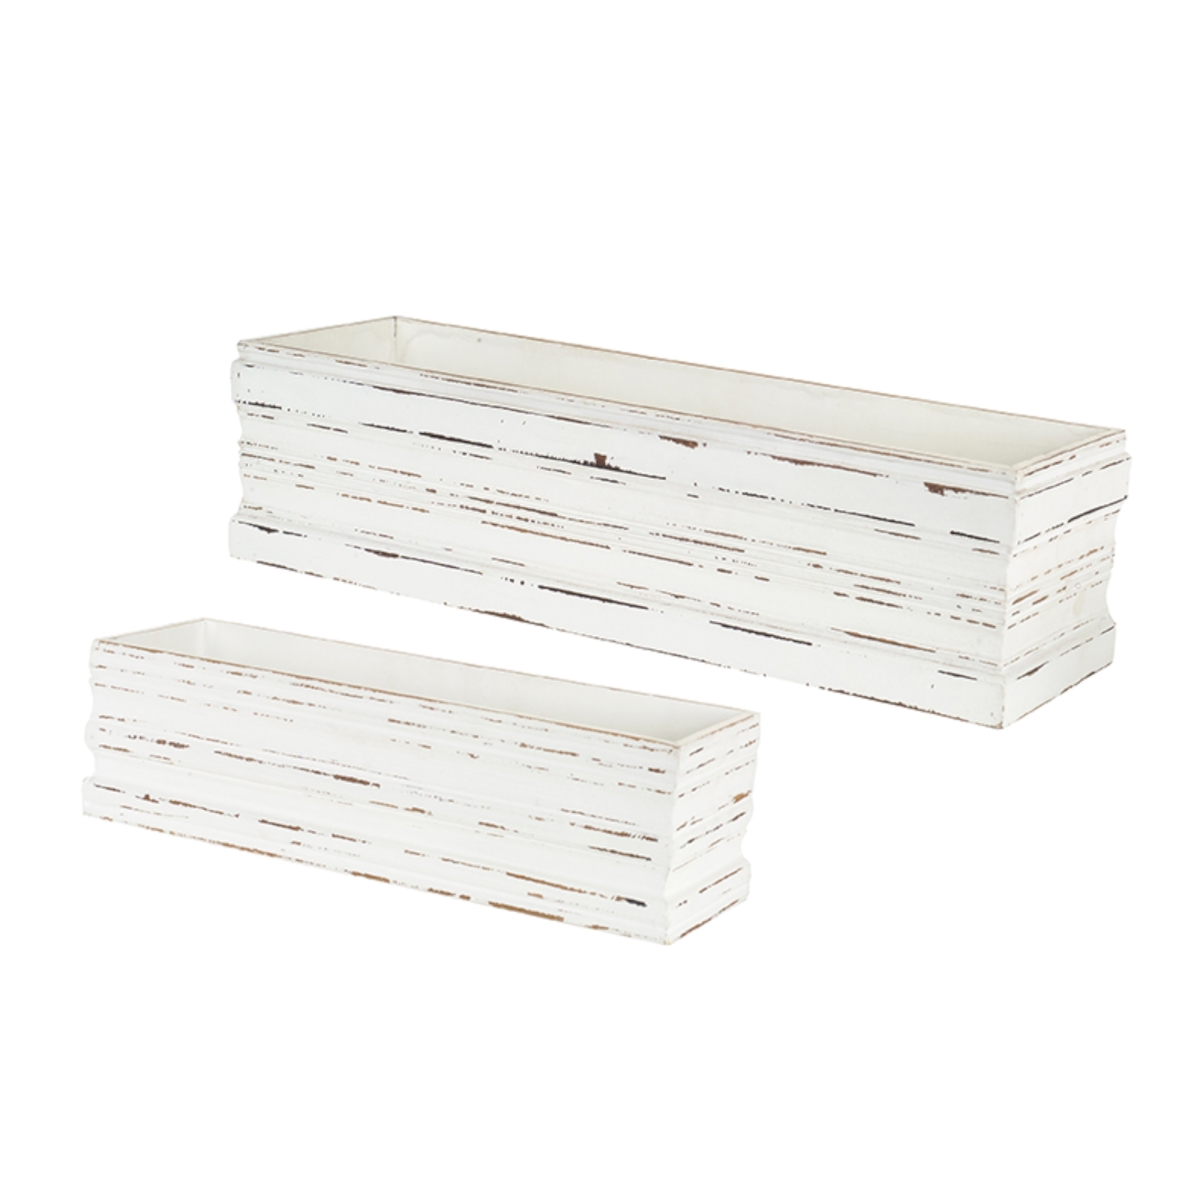 72529ds 6 X 18.5-7.5 X 24.75 In. Box, Mdf - Set Of 2